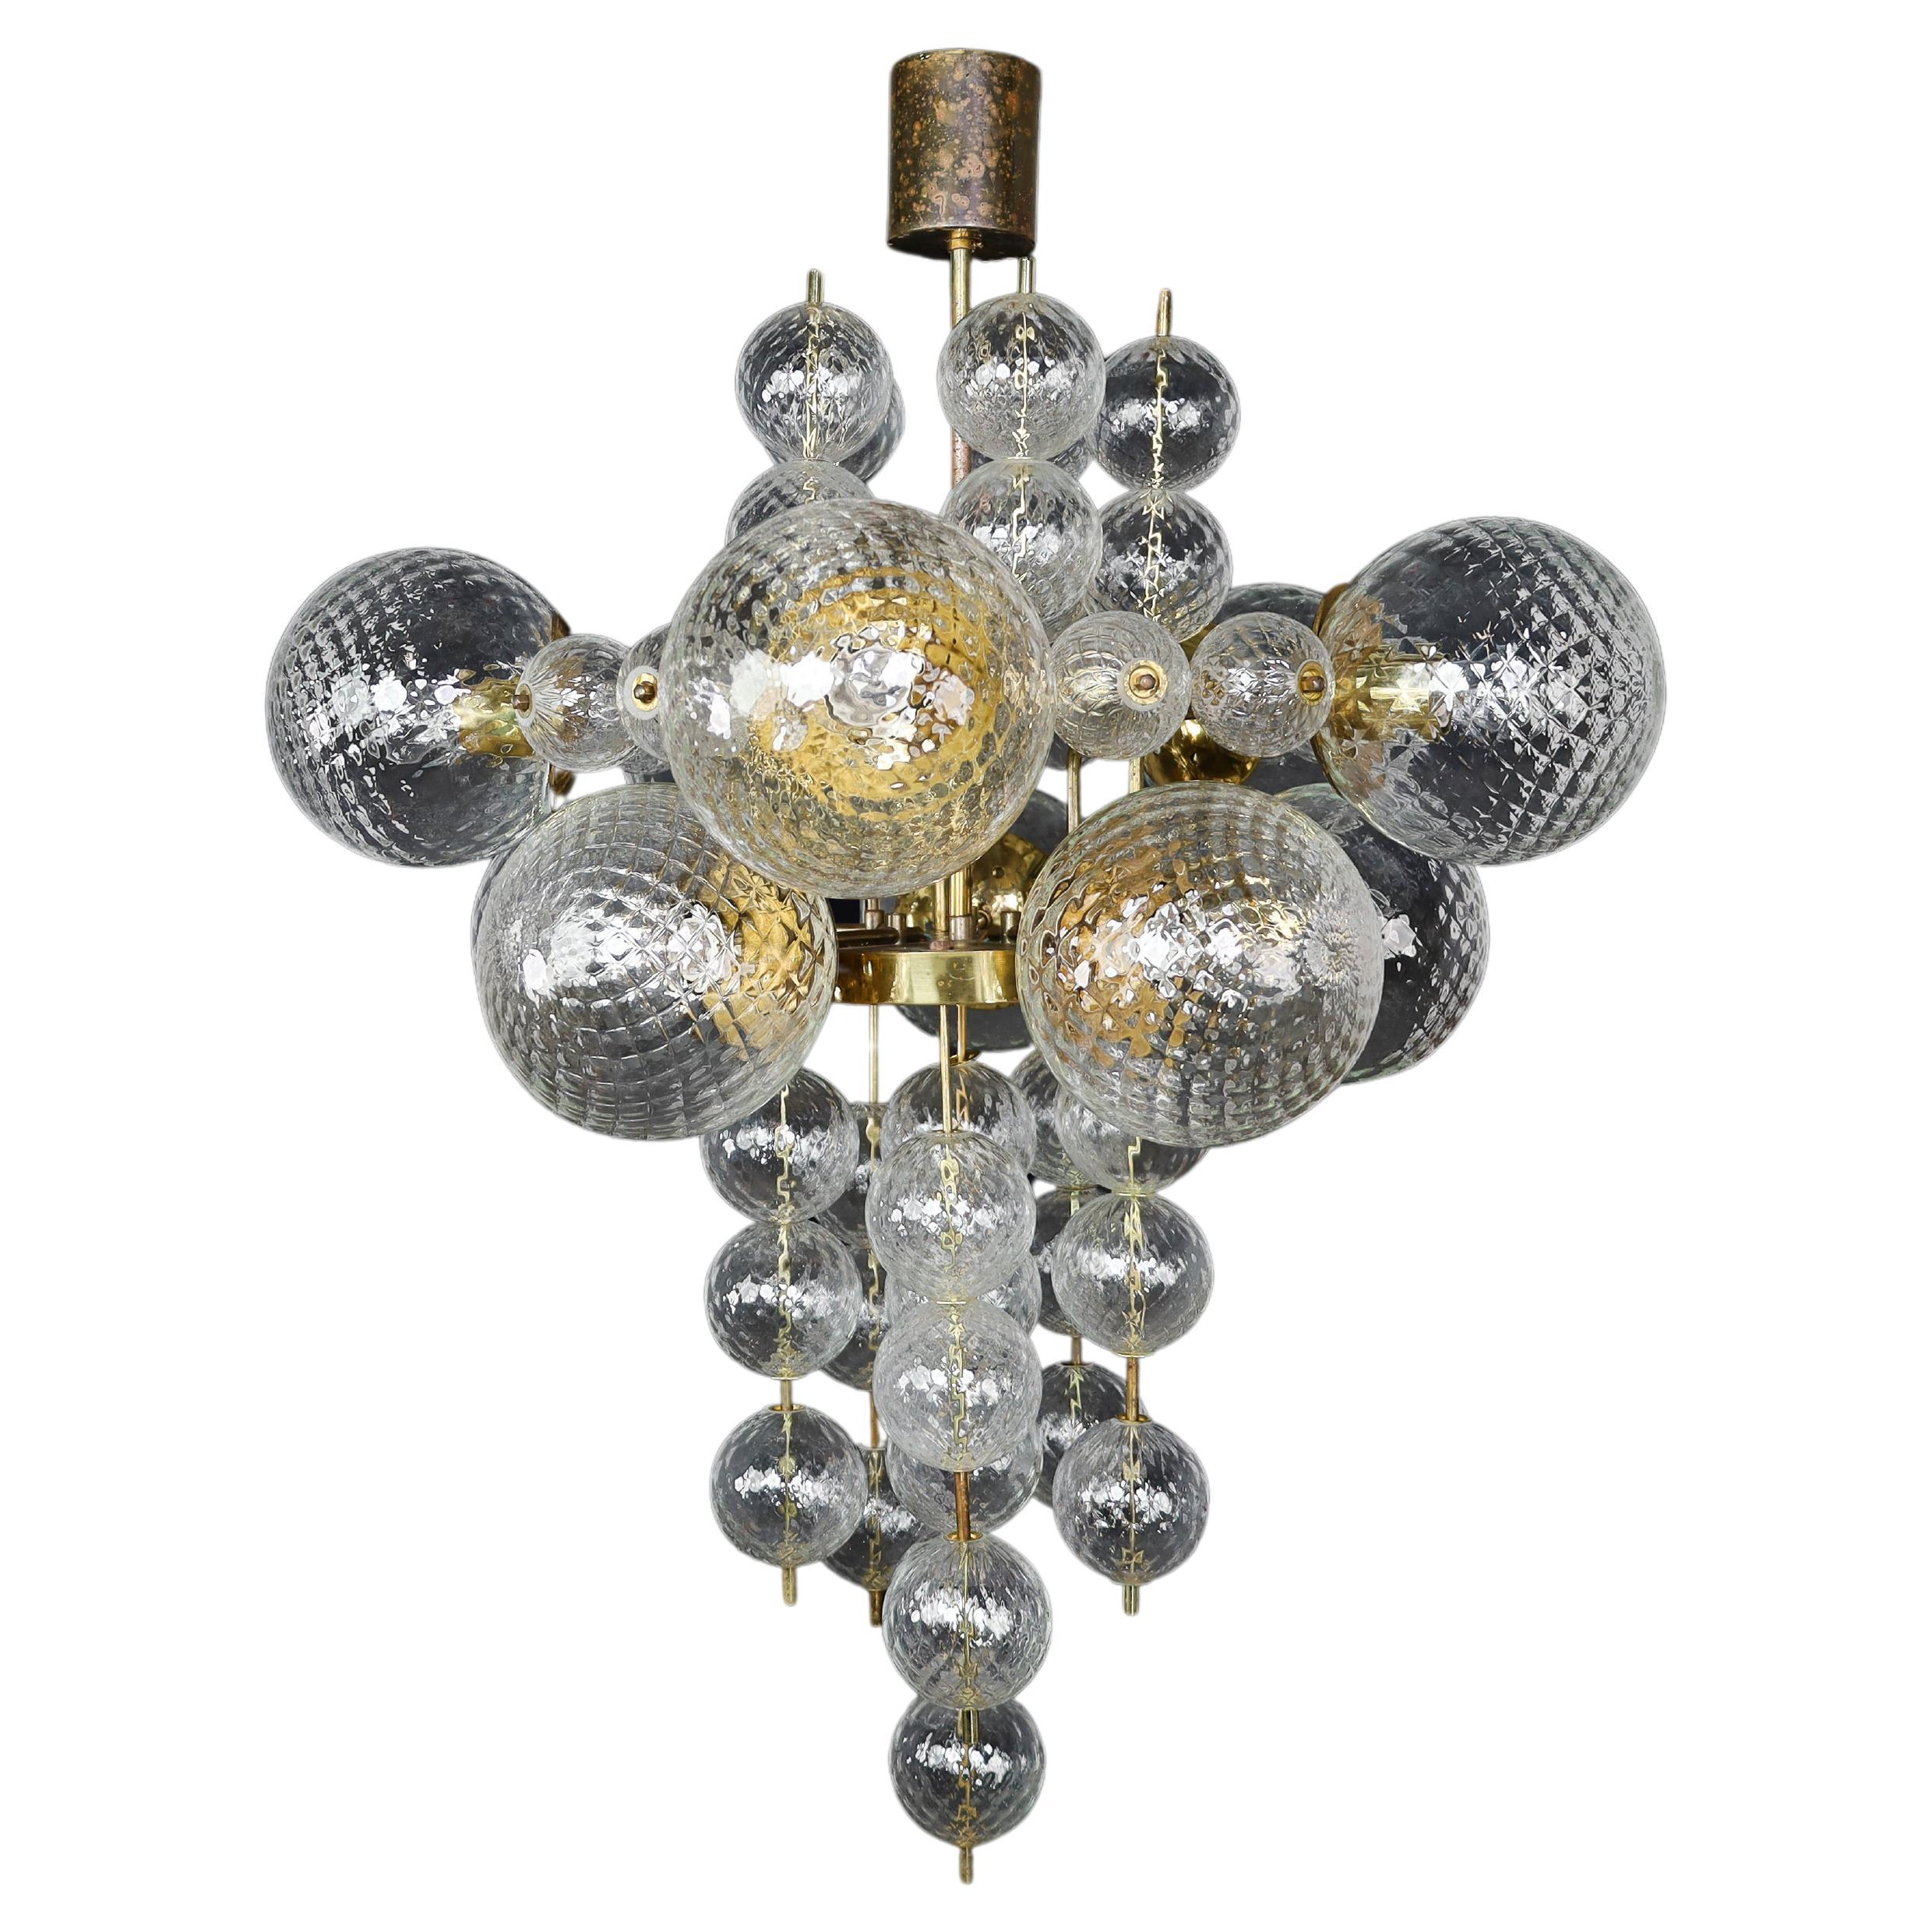  Chandelier with Patinated brass fixture and hand-blowed glass globes  CZ 1960s